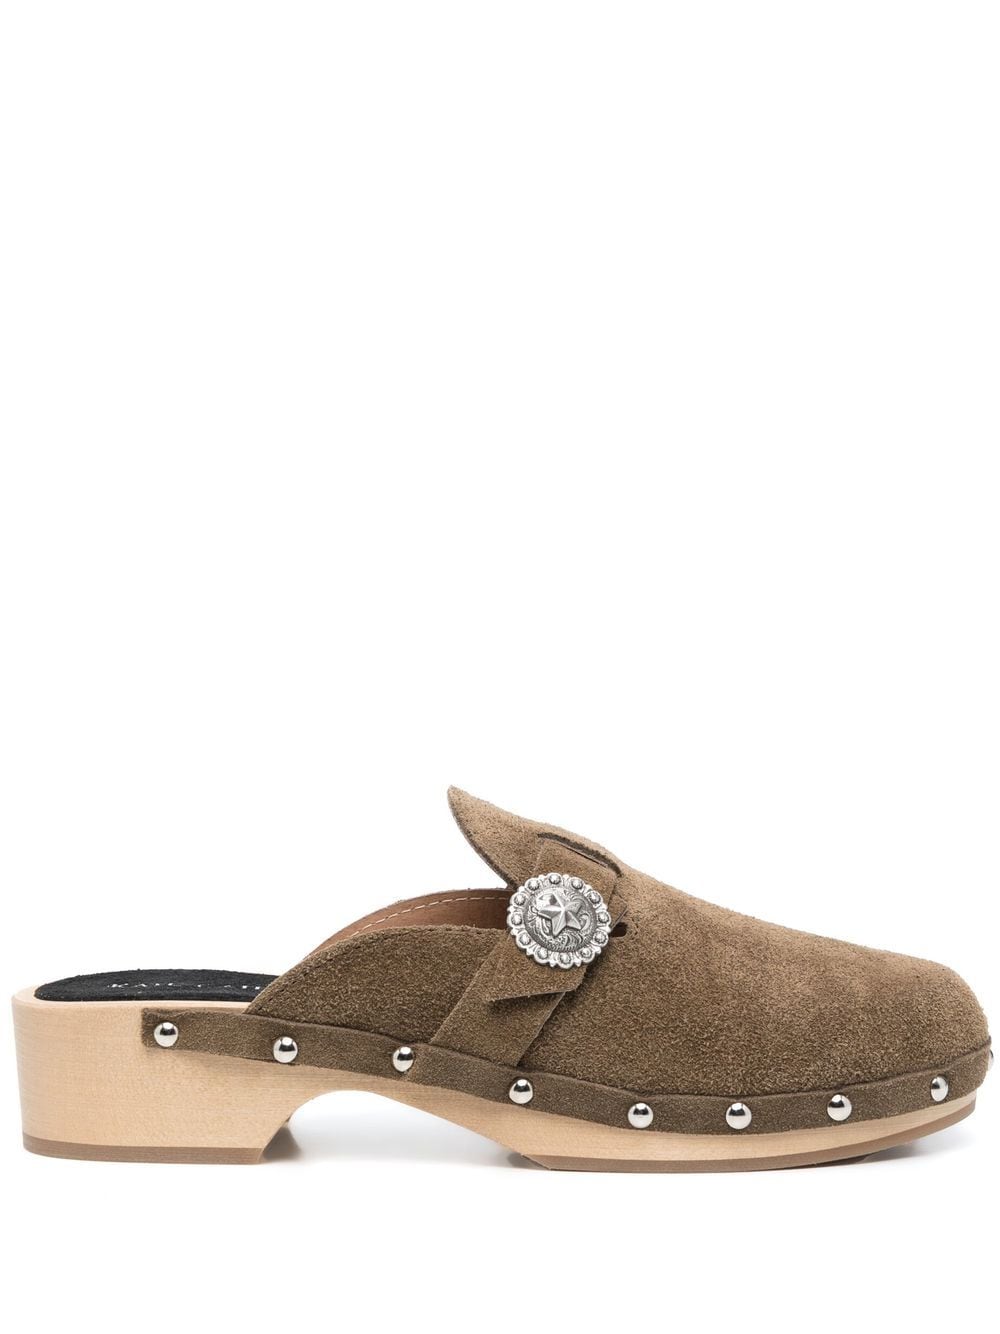 Kate cate KATE CATE- Allegra Suede Clogs